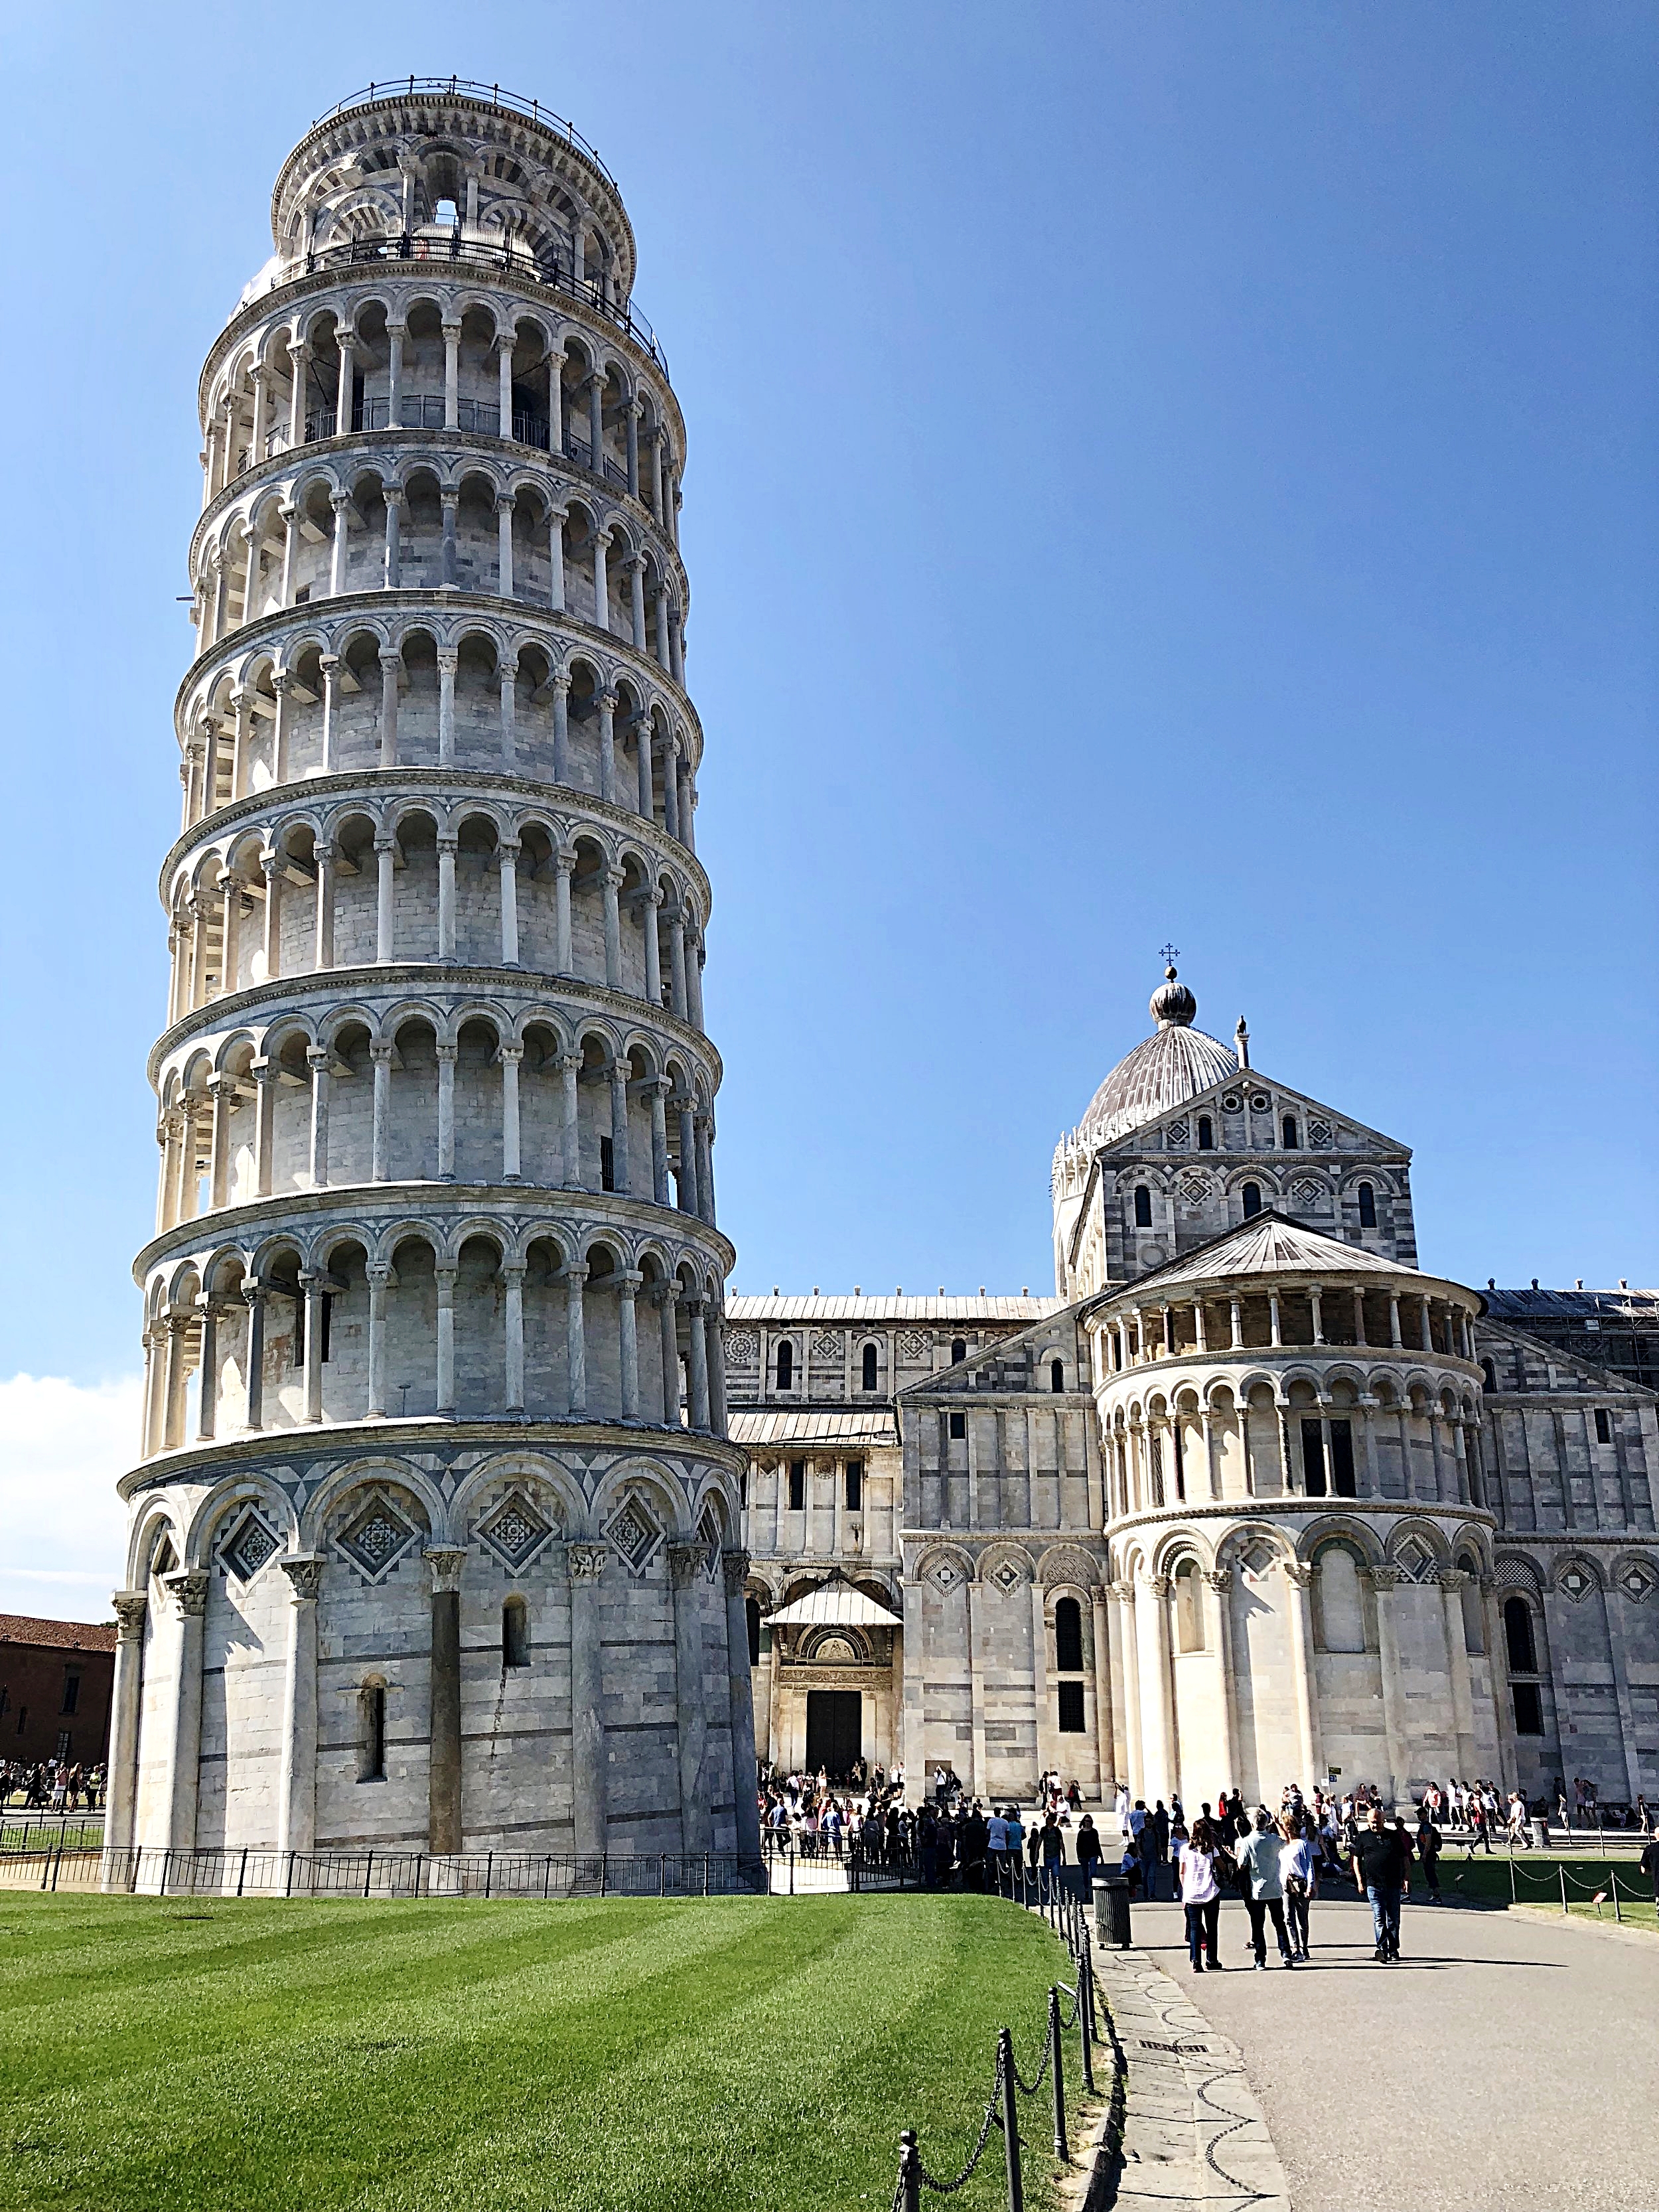 Who said the Tower at Pisa was leaning?